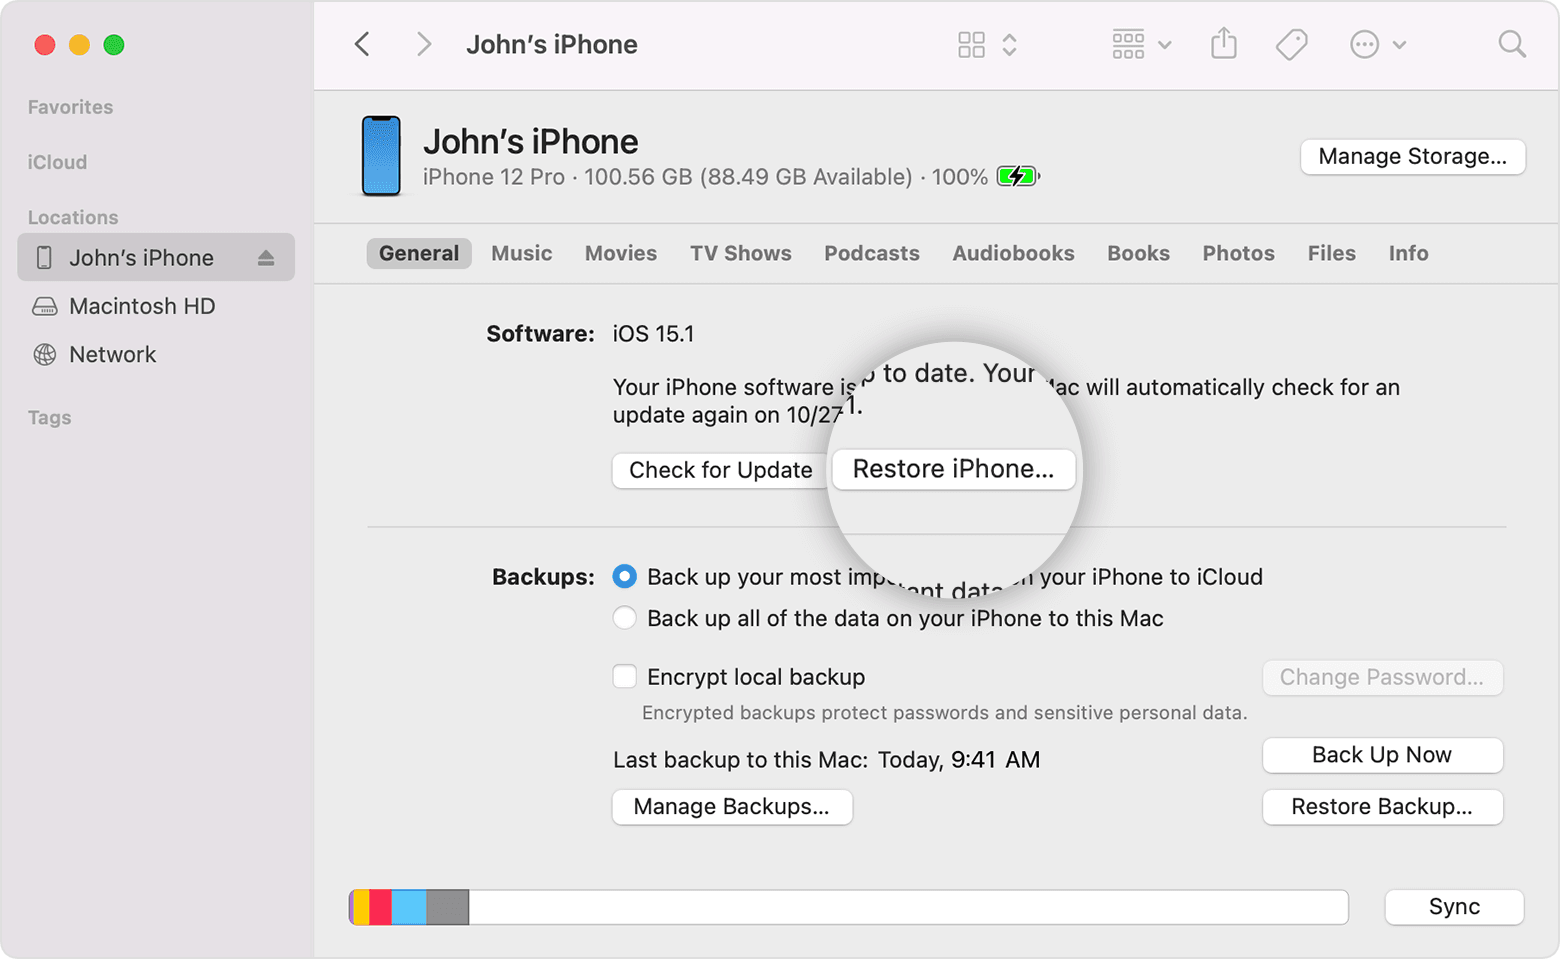 Connect iPhone to computer and open iTunes
Select iPhone and click "Restore iPhone"